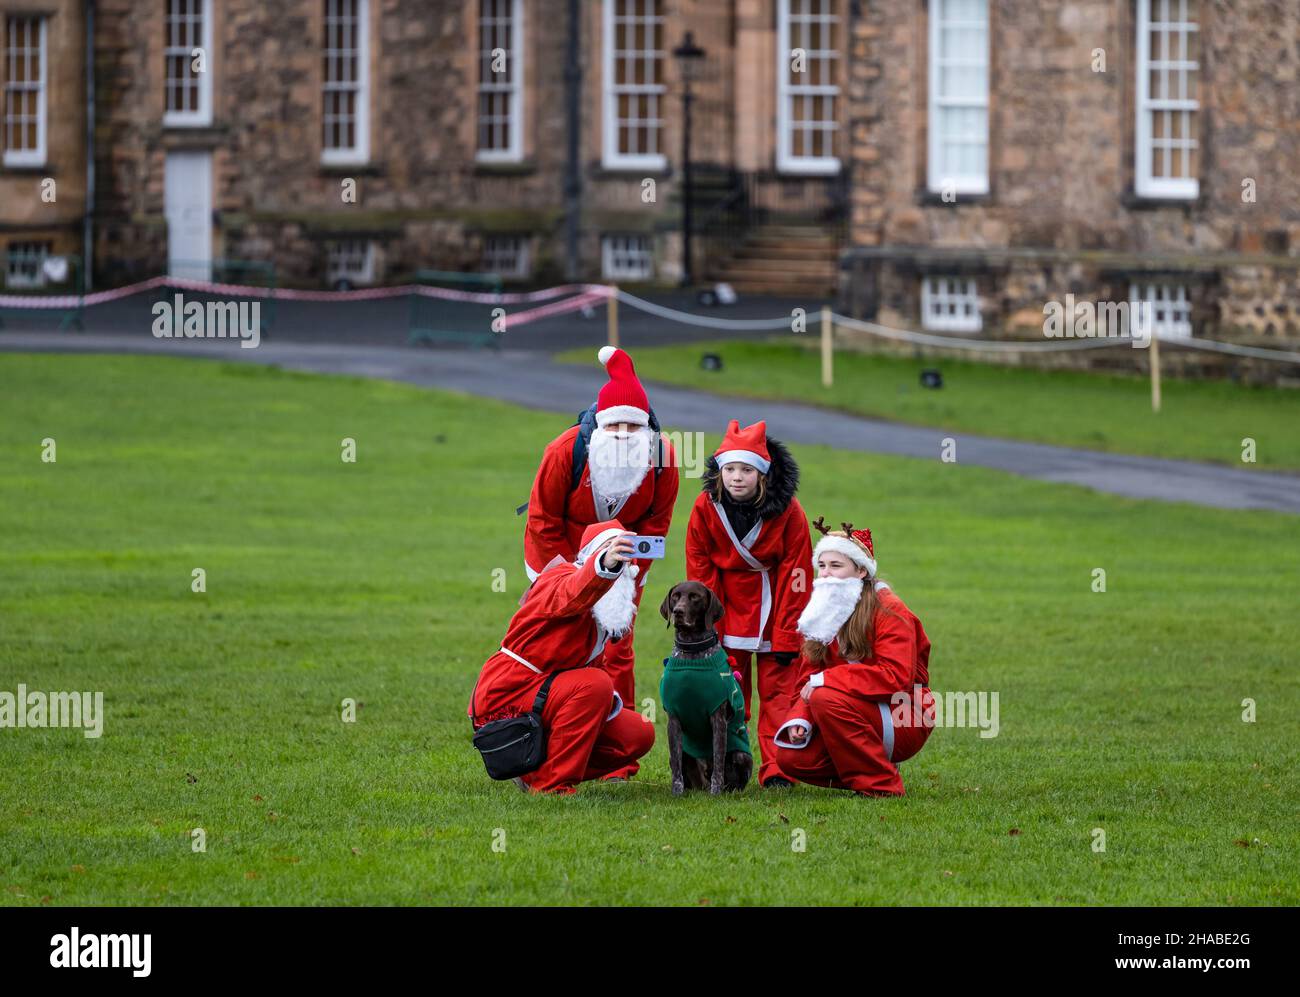 Dalkeith, Midlothian, Scotland, United Kingdom, 12th December 2021. Santa Run and Elf Dash: the charity fund-raising event takes place in Dalkeith Country Park to raise money for CHAS (Children’s Hospices Across Scotland) Pictured: a family taking part in the Santa Run take a selfie photo before the event. Stock Photo